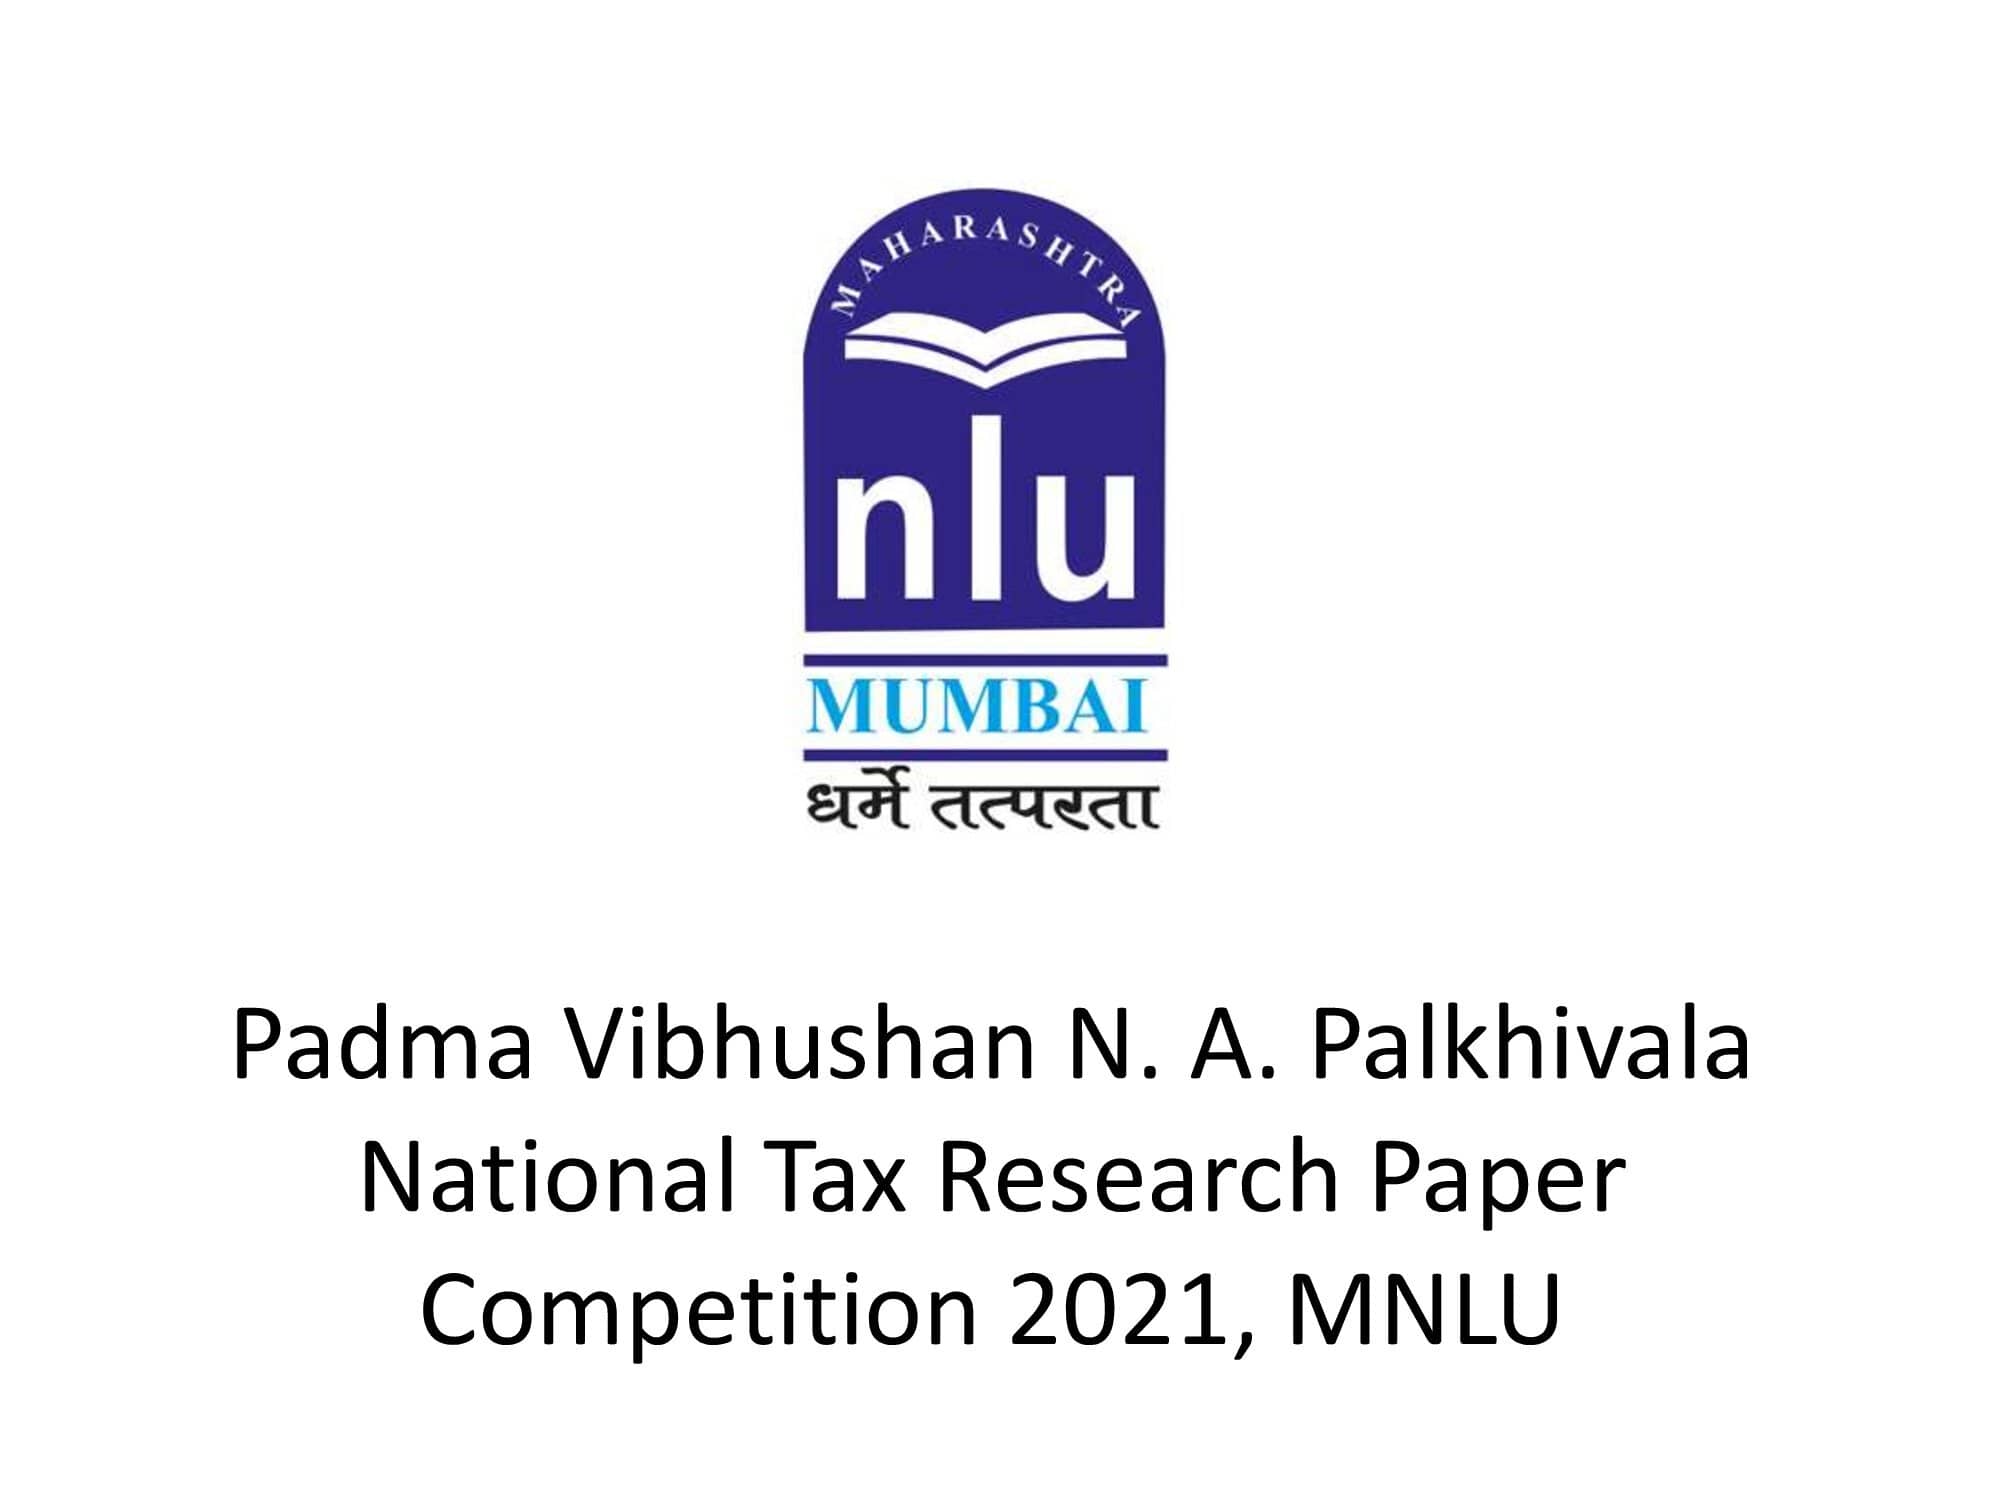 Padma Vibhushan N. A. Palkhivala National Tax Research Paper Competition 2021, MNLU